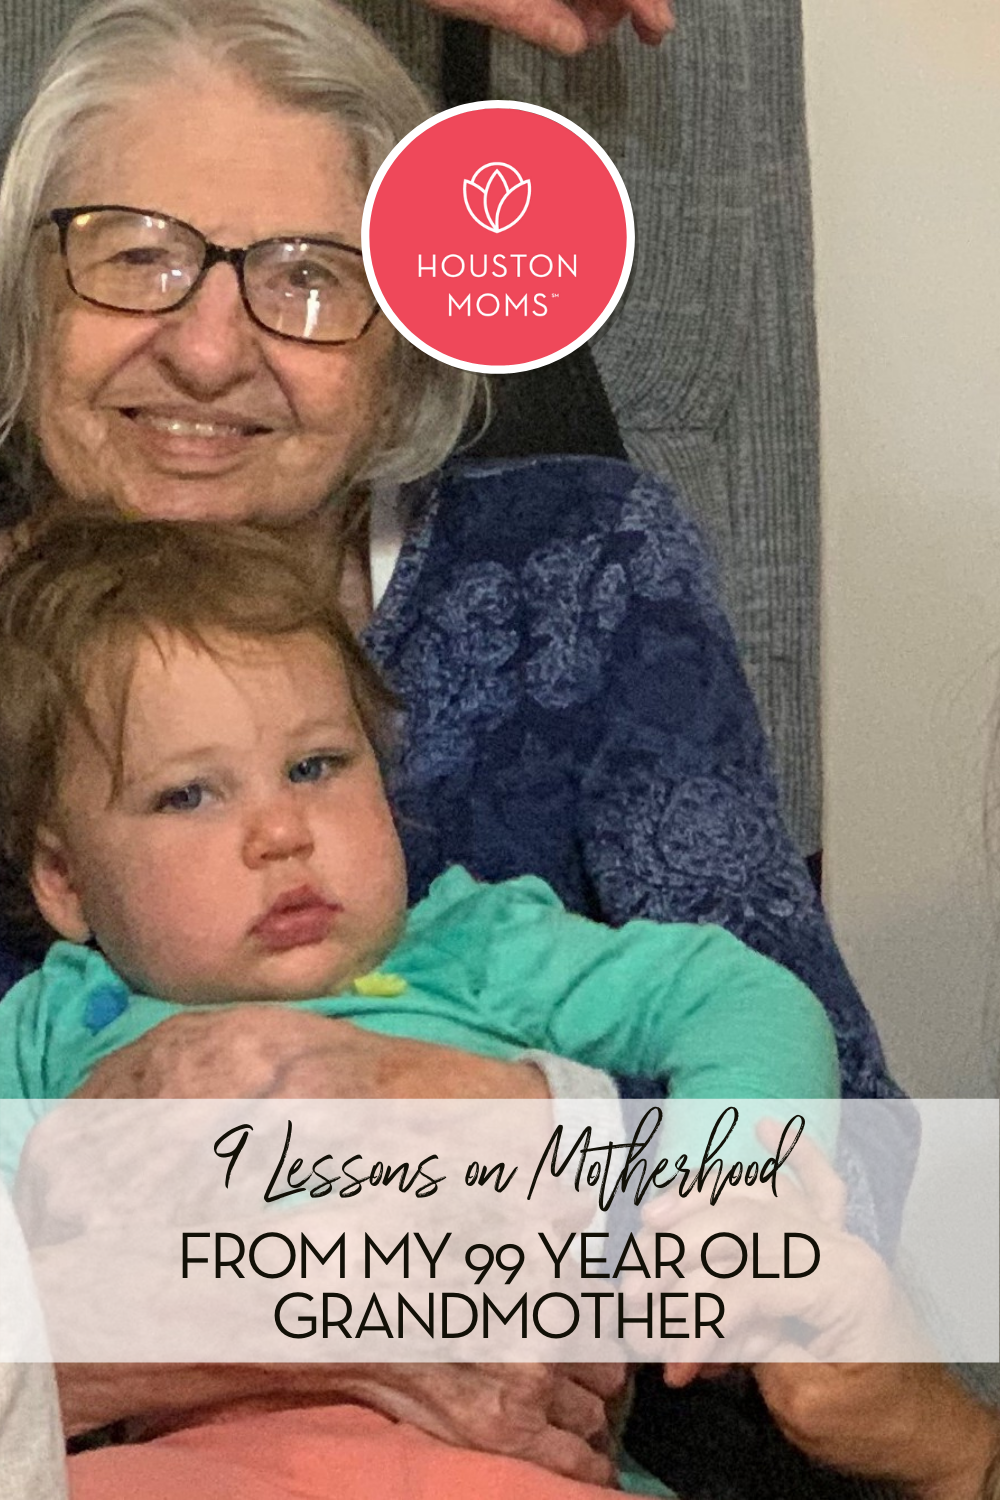 9 Lessons on motherhood from my 99 year old grandmother. A photograph of a grandmother holding her granddaughter. Logo: Houston moms. 